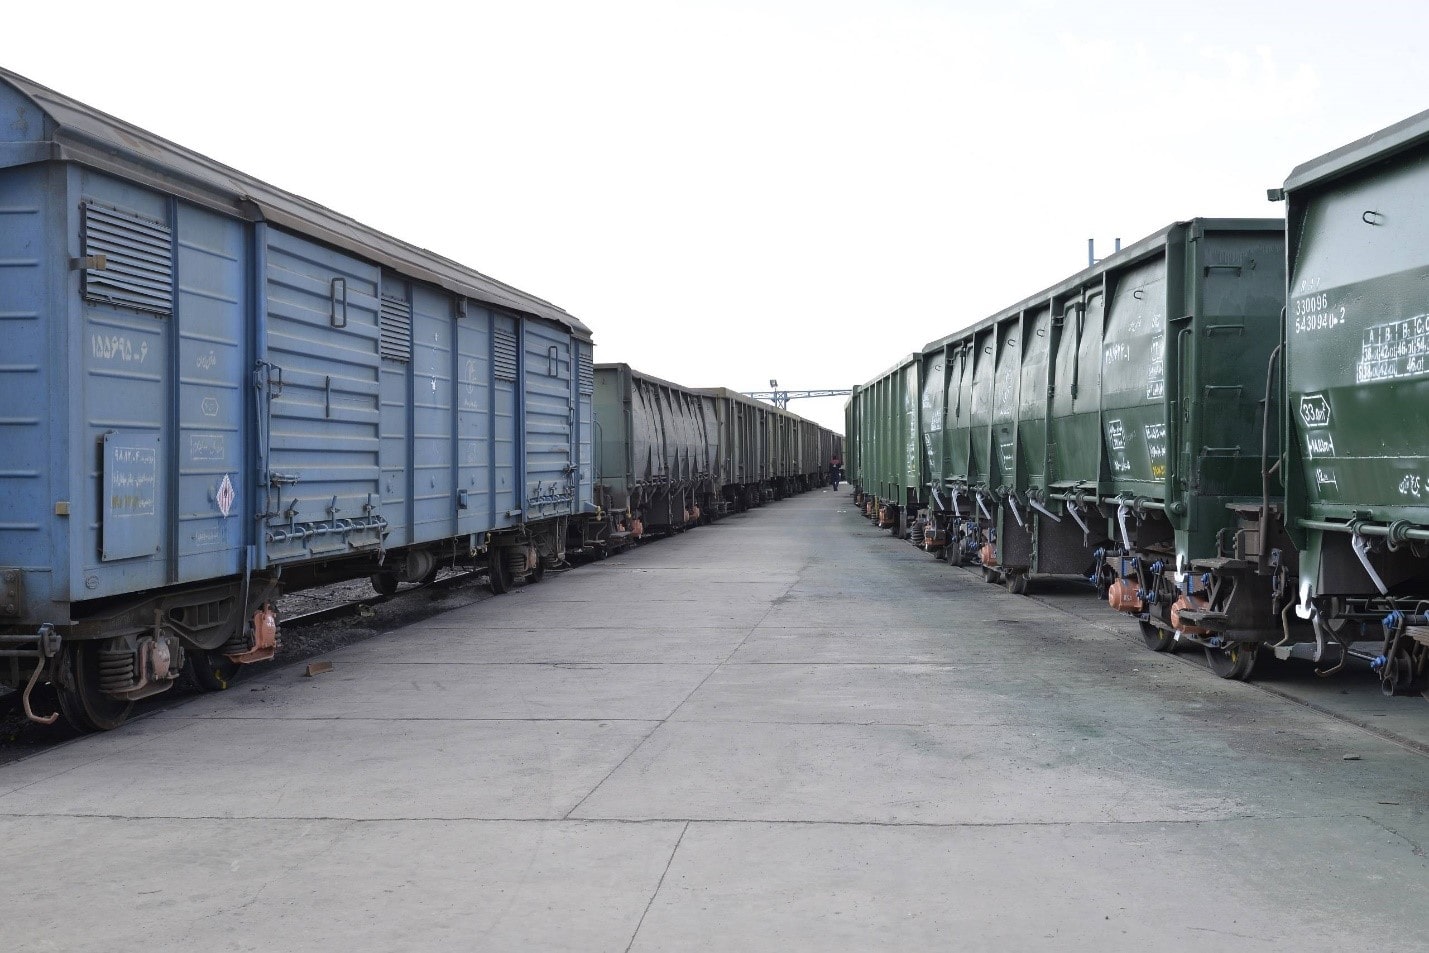 The capacity of wagons